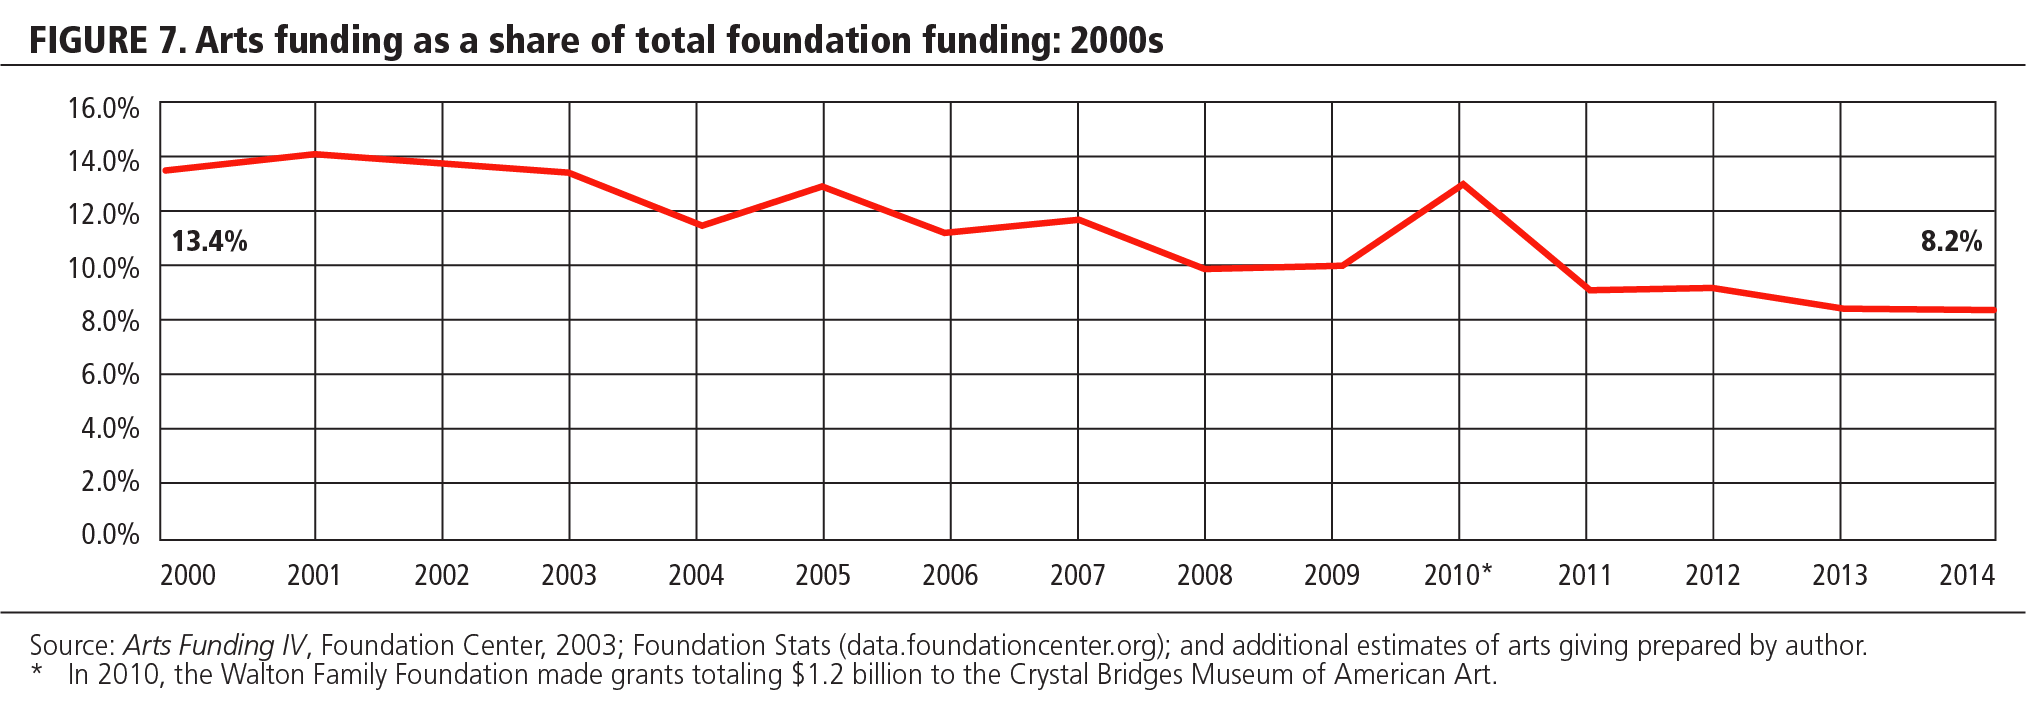 FIGURE 7 Arts funding as a share of total foundation funding: 2000s